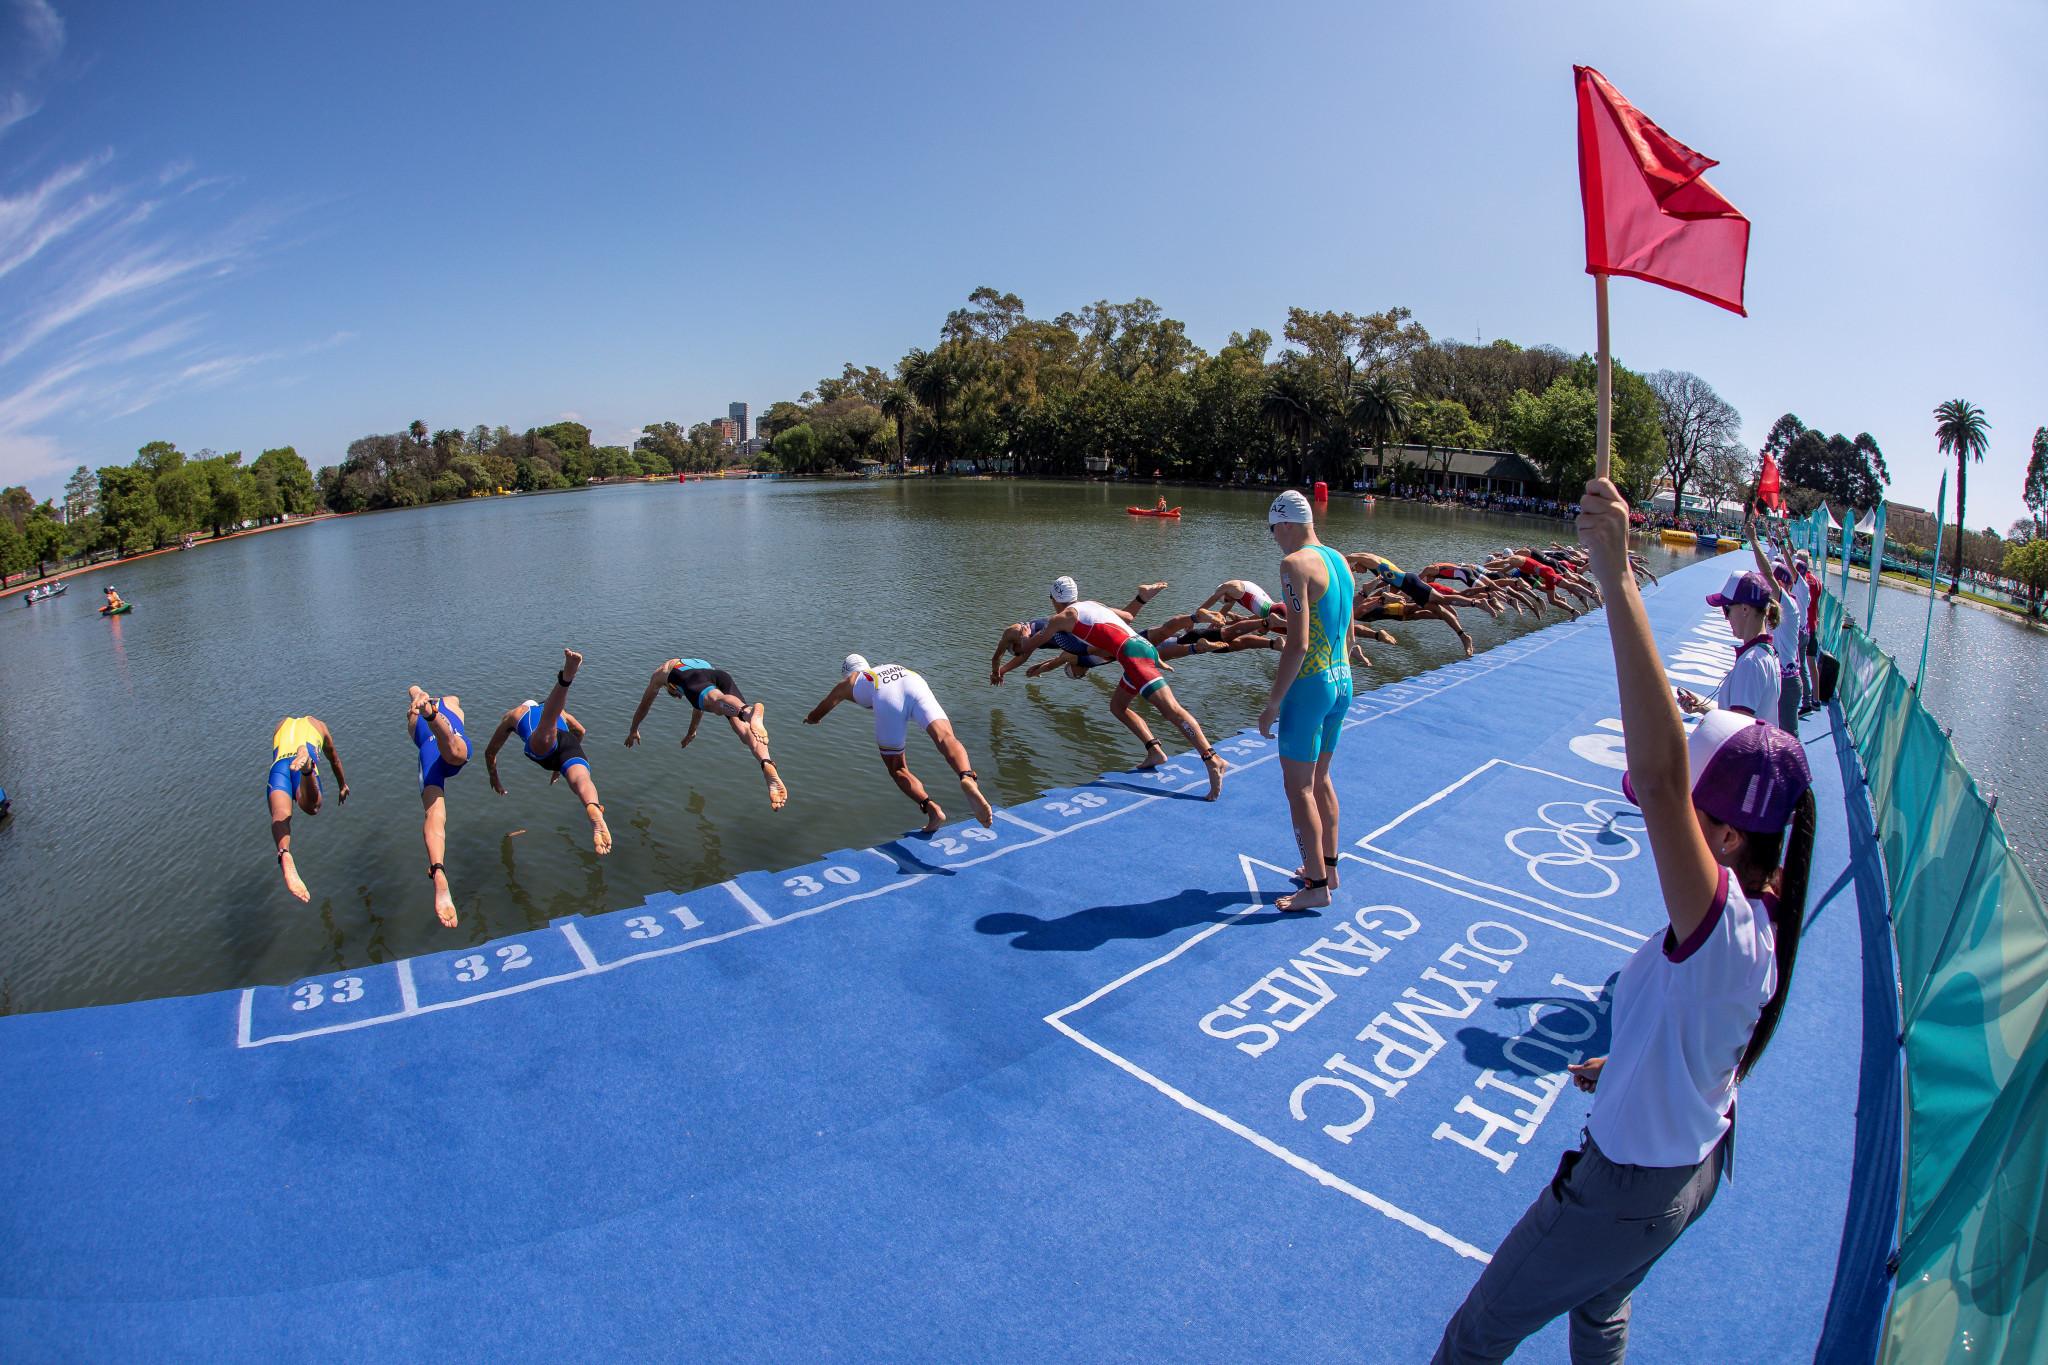 Changes have been made to the rules of International Triathlon Union events, with procedures regarding penalties, appeals, water temperature limits and water quality updated ©ITU